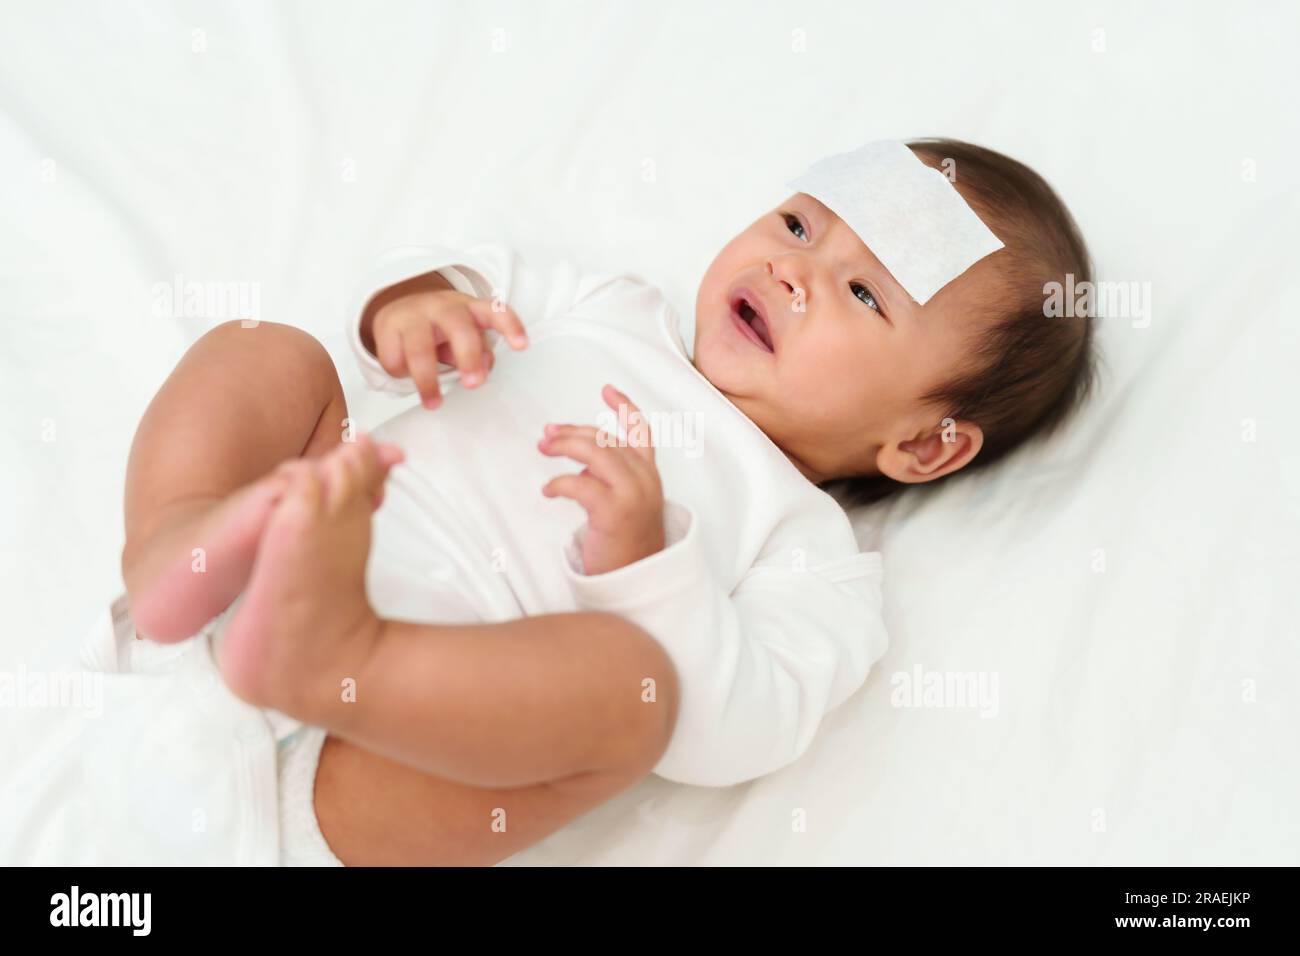 sick crying baby with cool fever jel pad on forehead Stock Photo